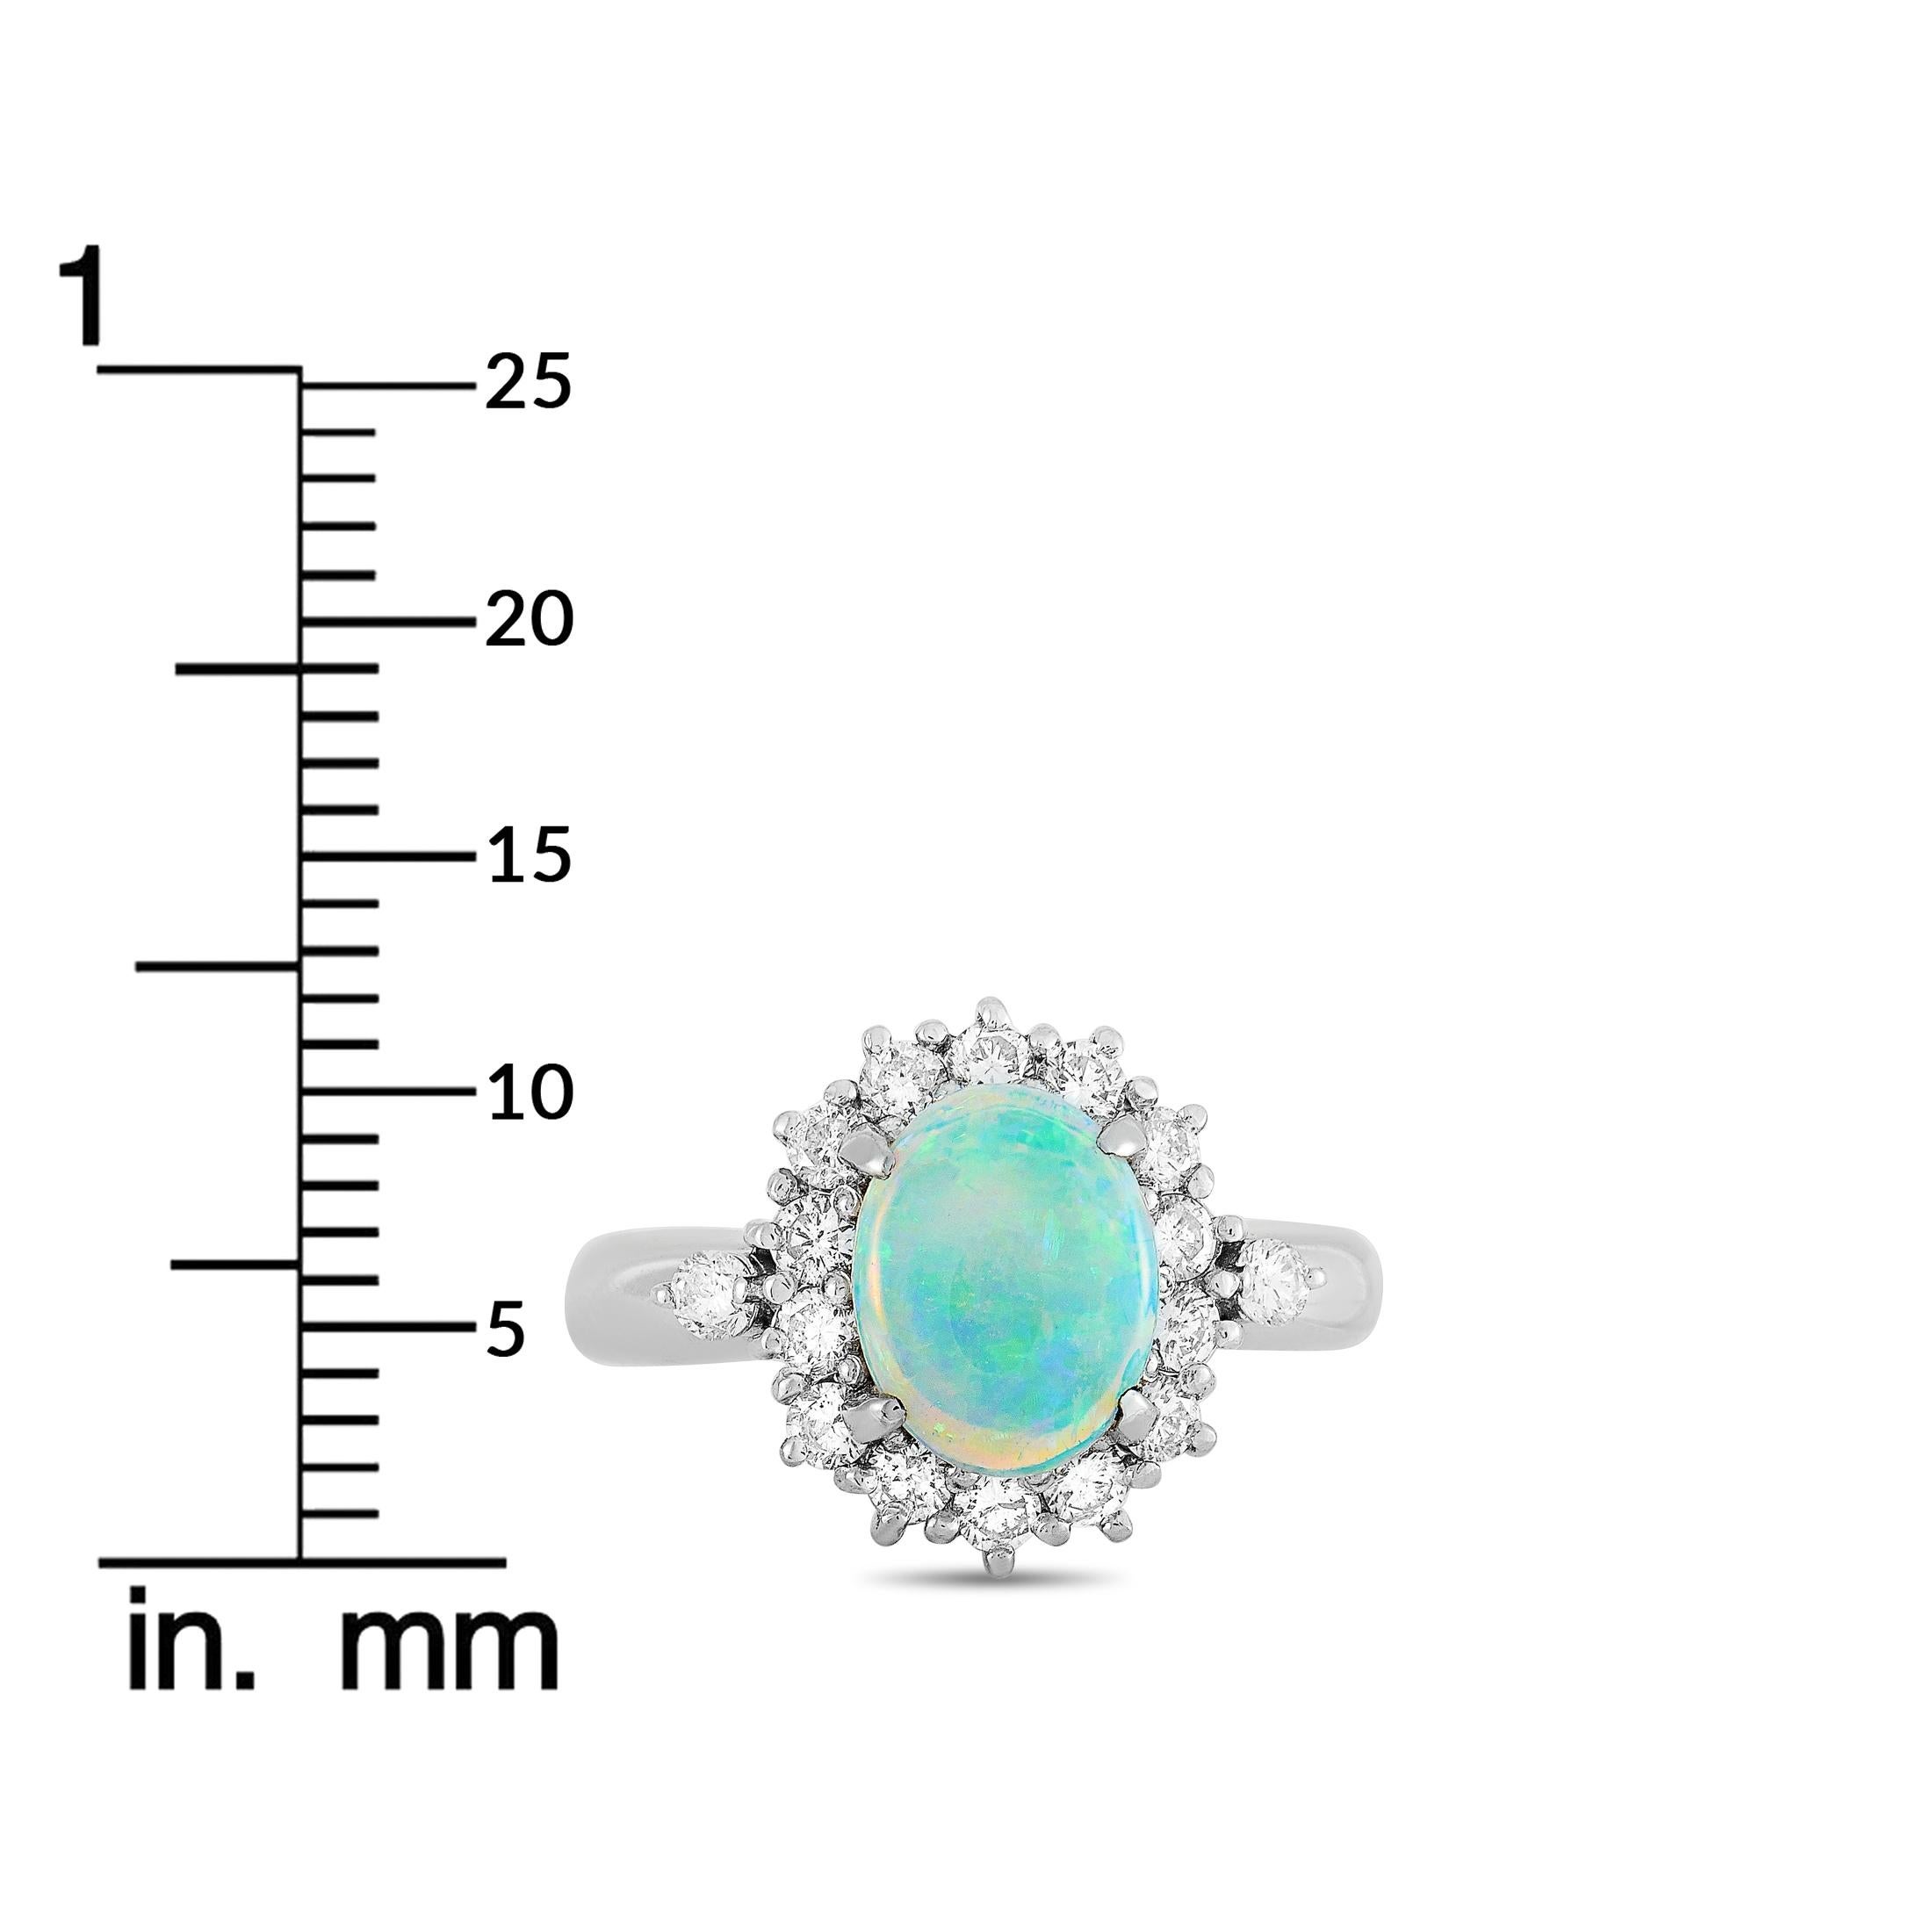 LB Exclusive Platinum 0.57 Carat Diamond and Opal Oval Ring 2